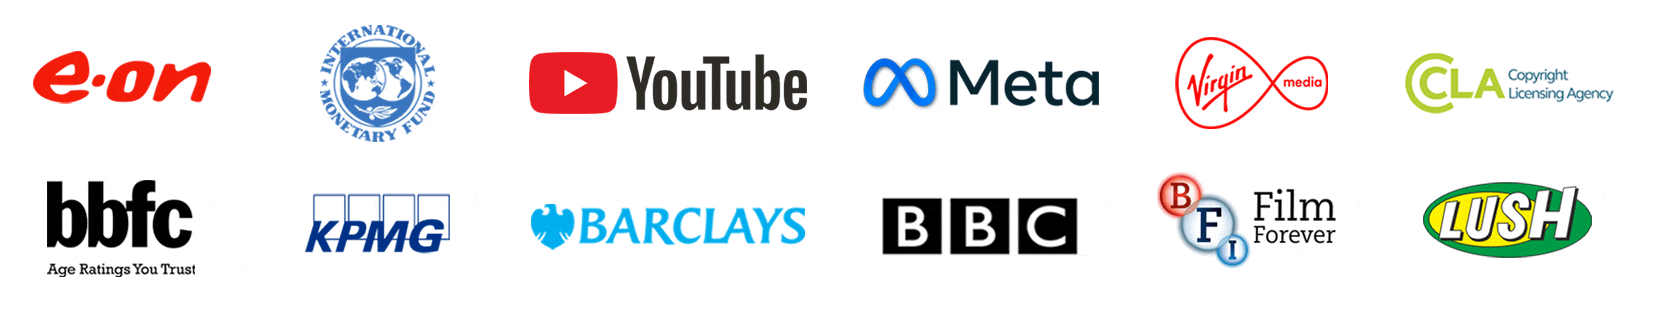 Logos of Corporate Photography Client List  including Barclays,  Meta, YouTube, BBC and IMF